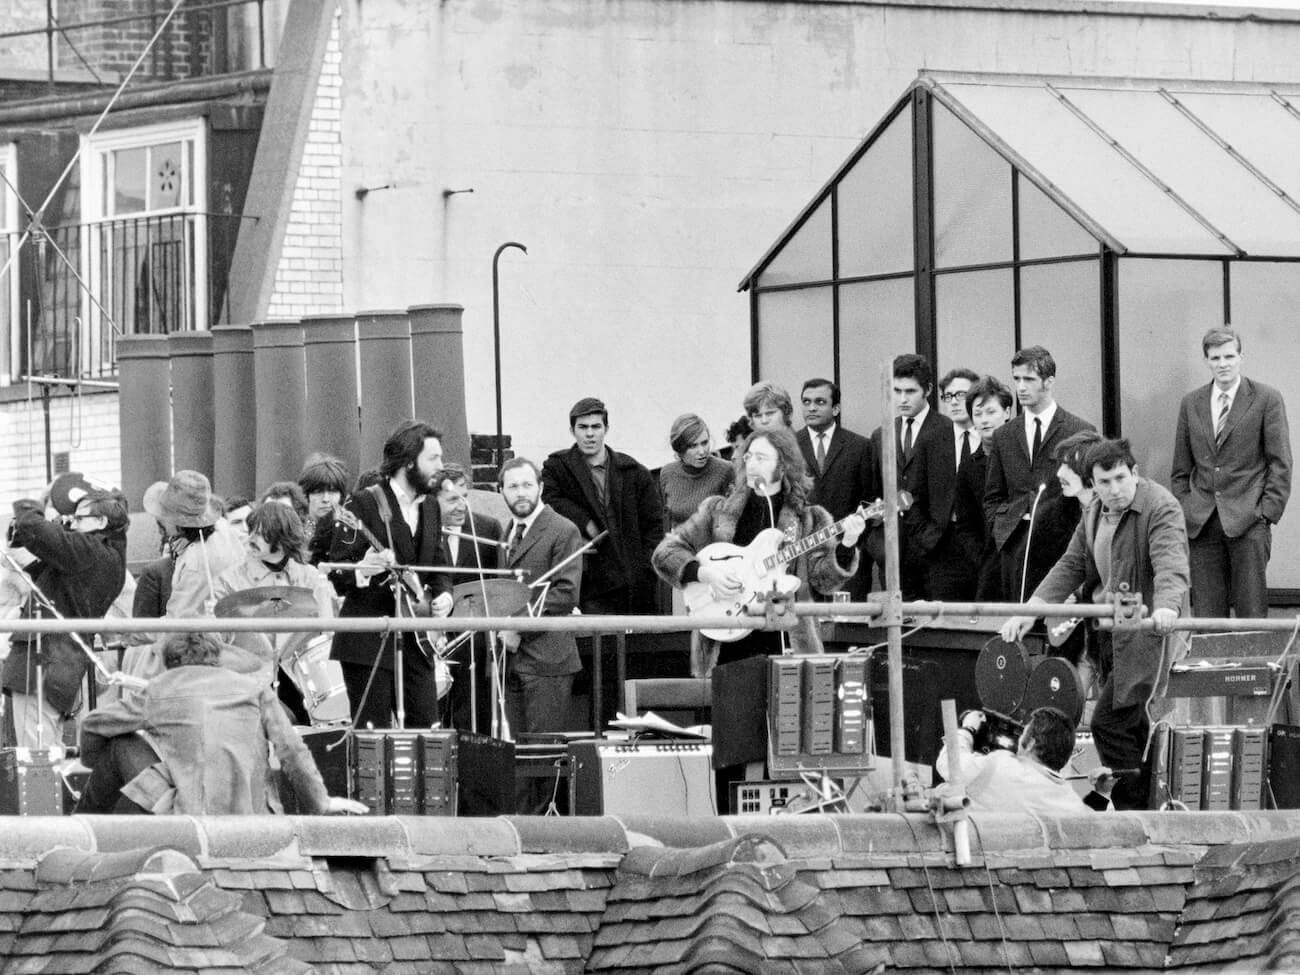 The Beatles performing on the rooftop of Apple Headquarters in 1969.